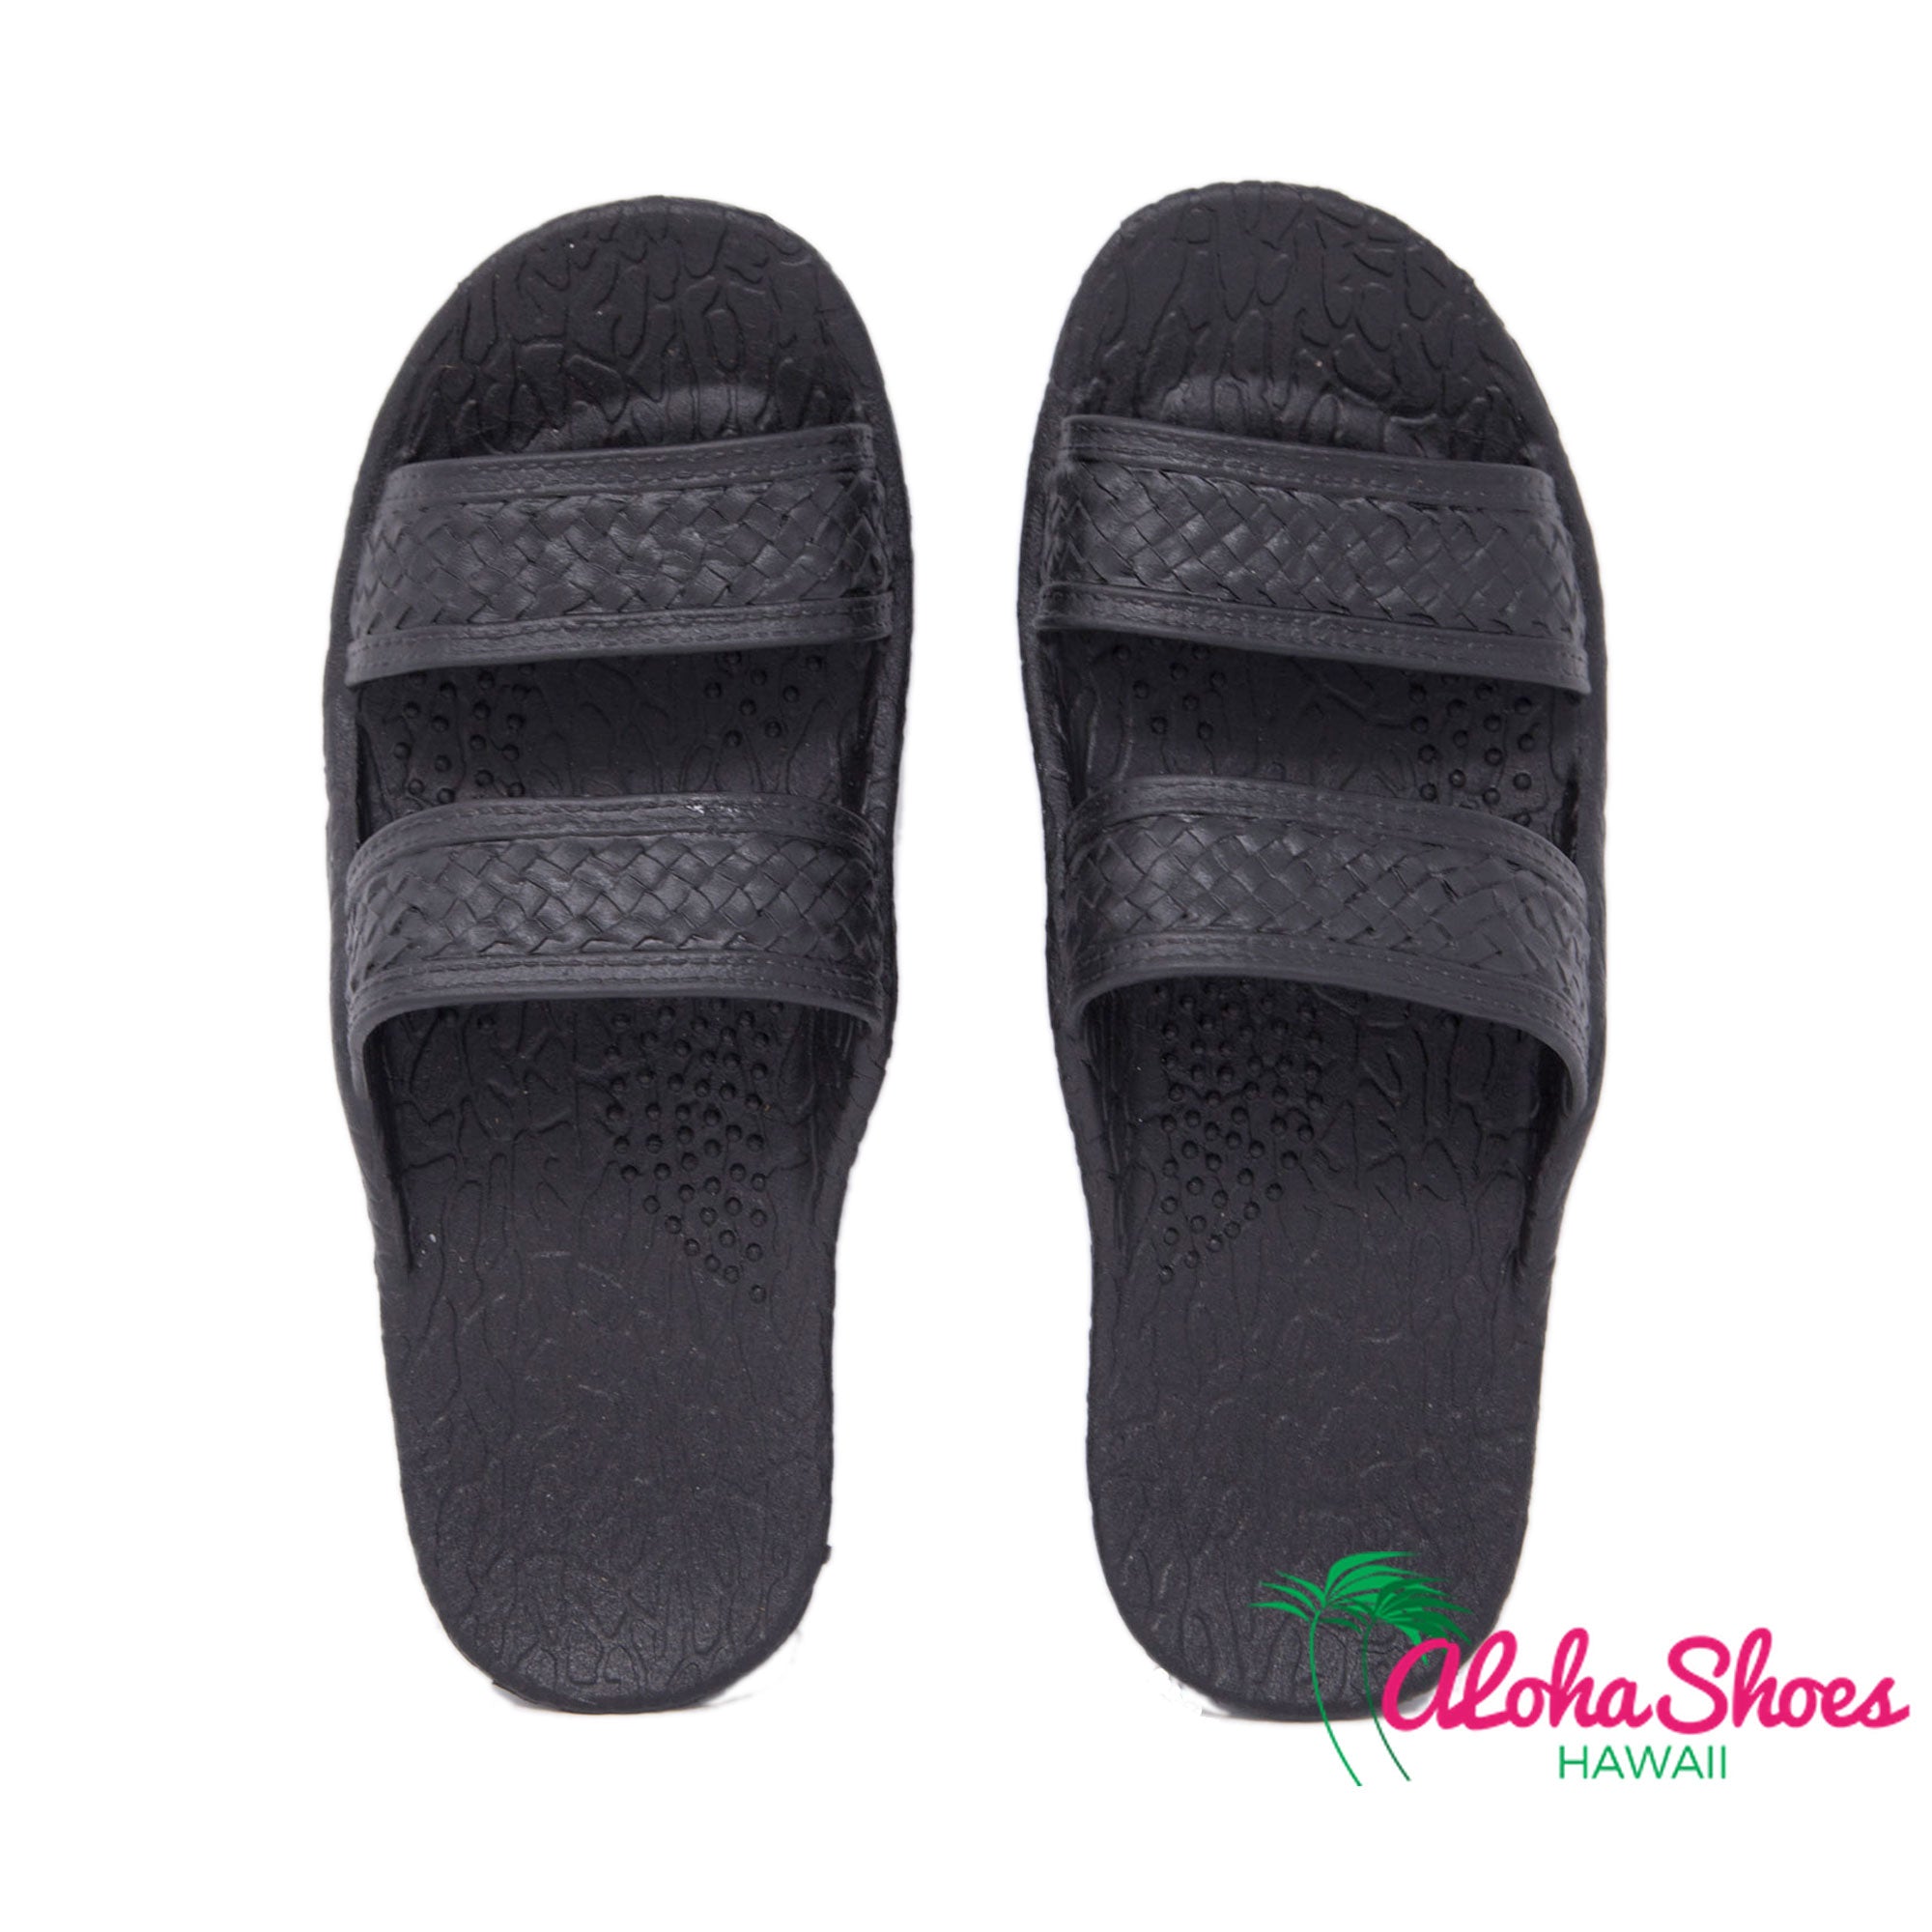 Jandals 60% Off | 2019 Jesus Sandals | All Colors In Stock - AlohaShoes ...